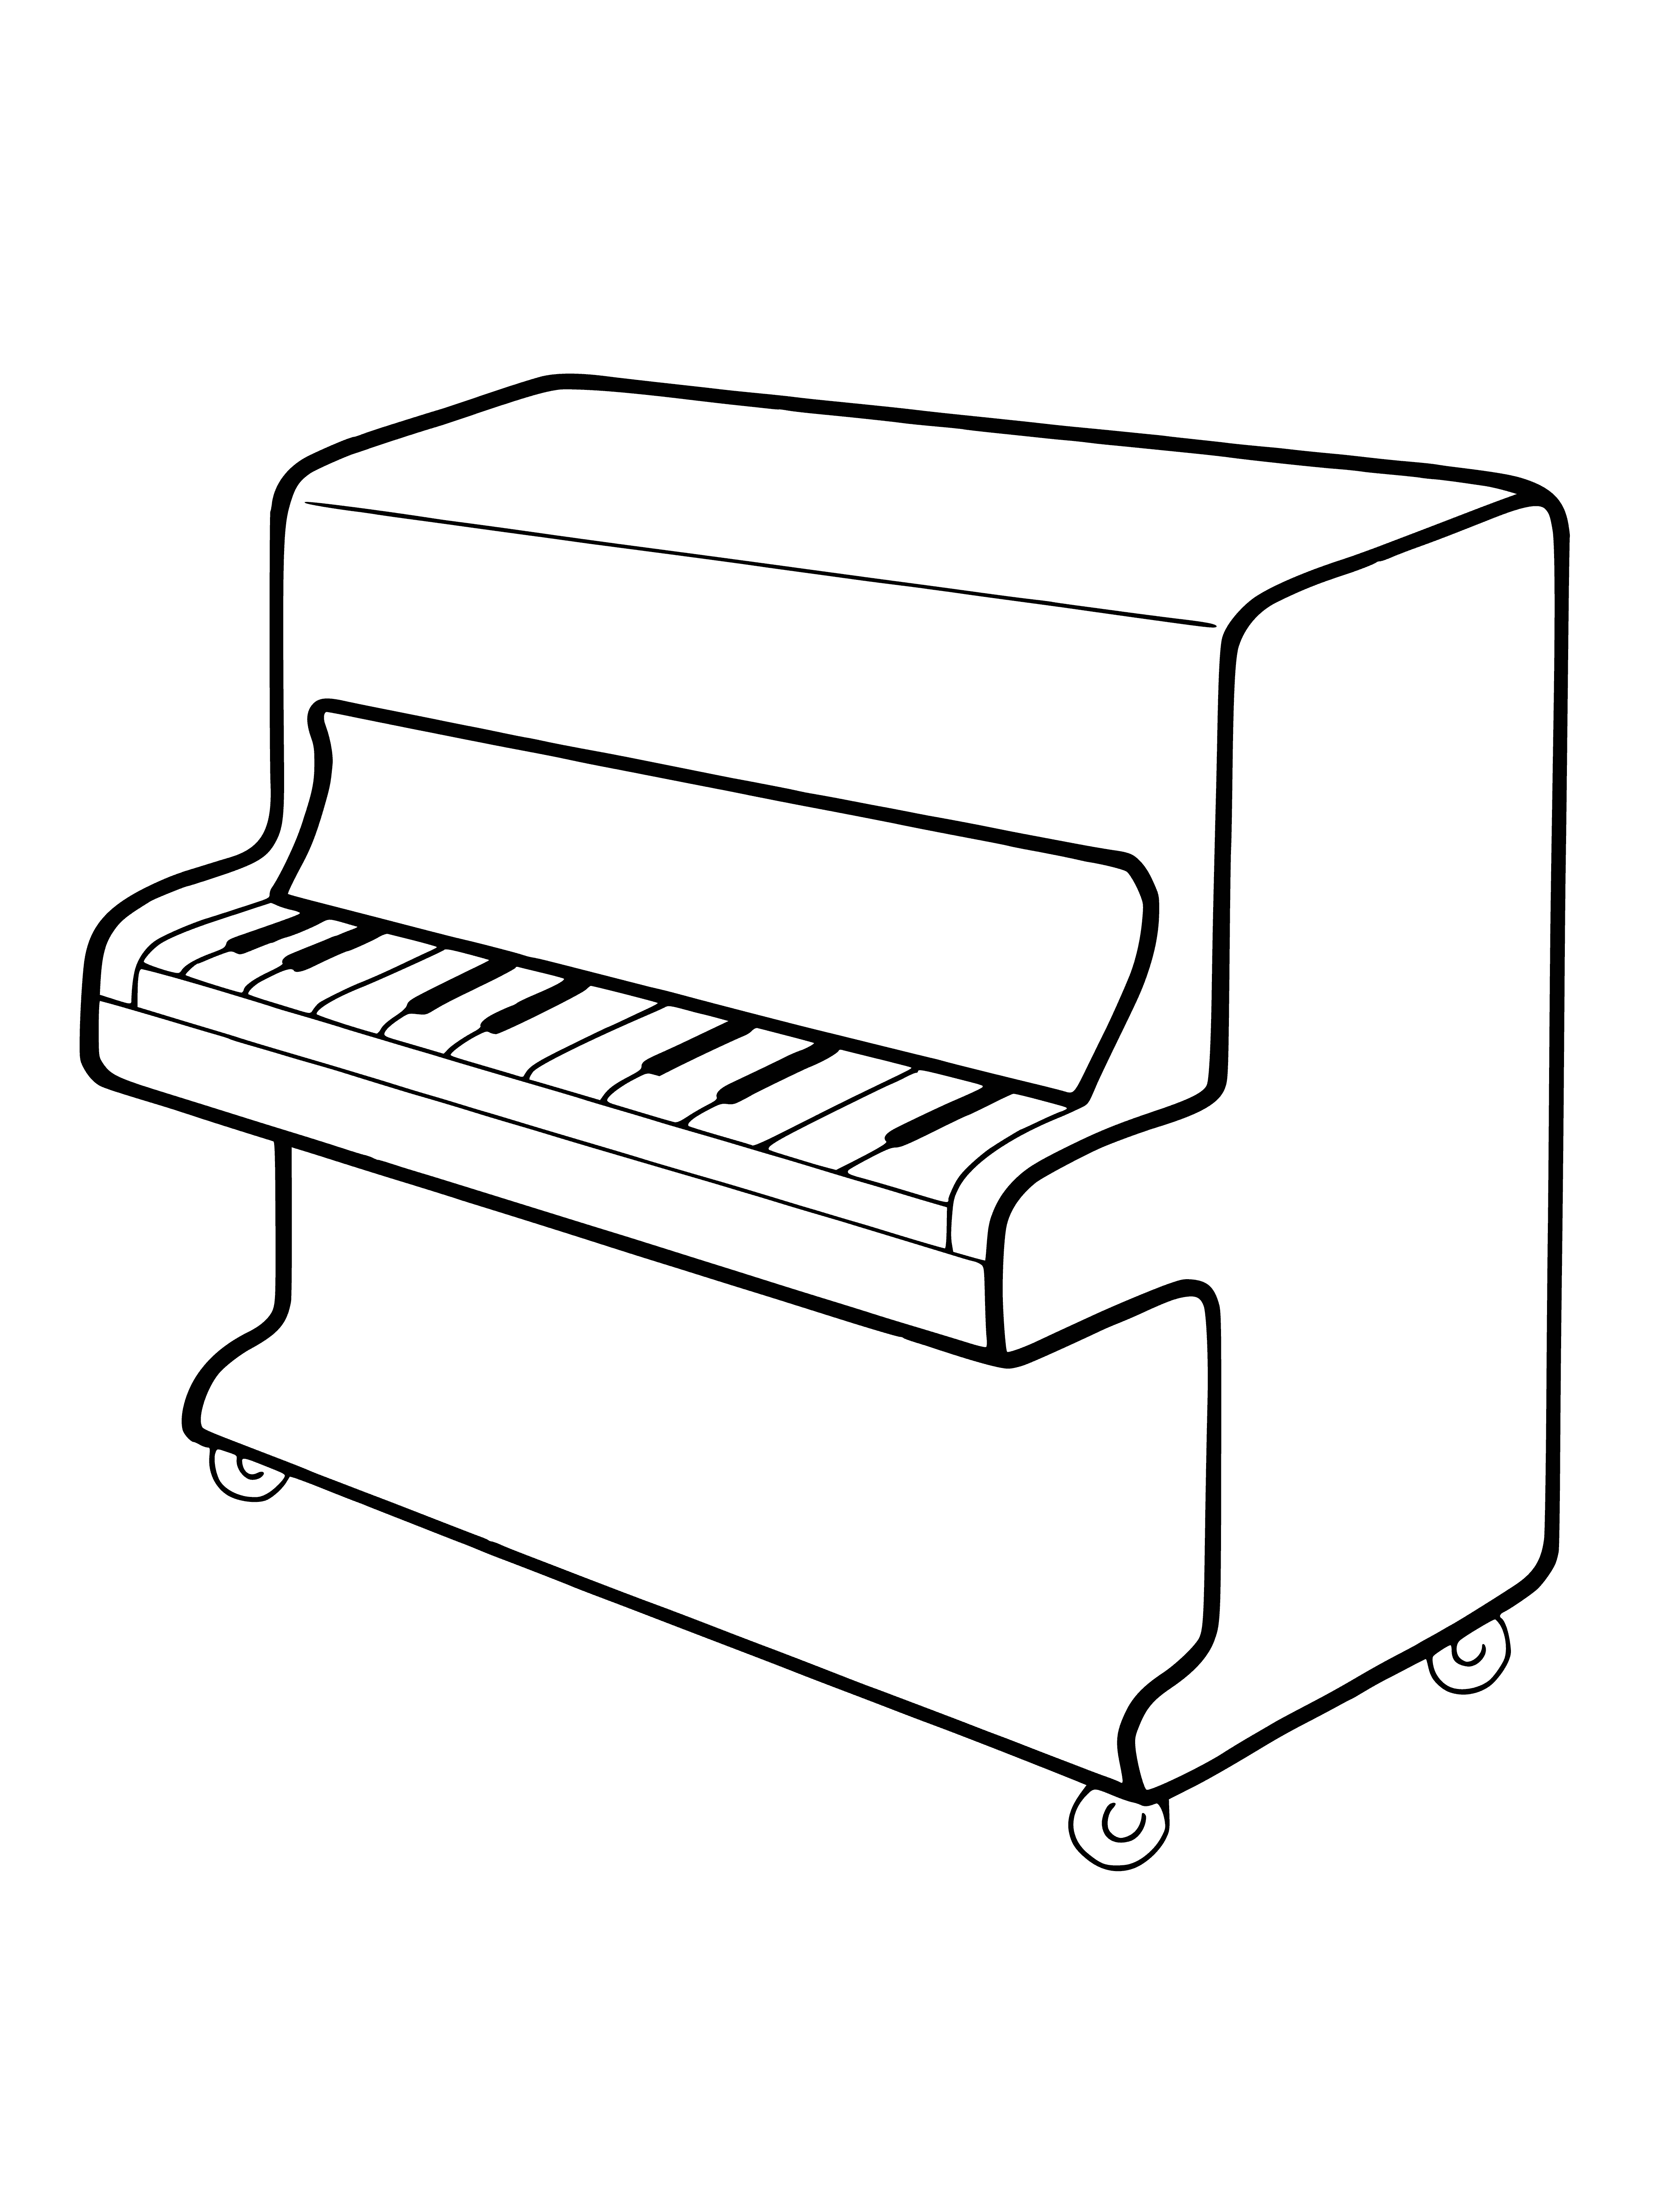 coloring page: Person playing piano on a large wooden instrument with black & white keys.